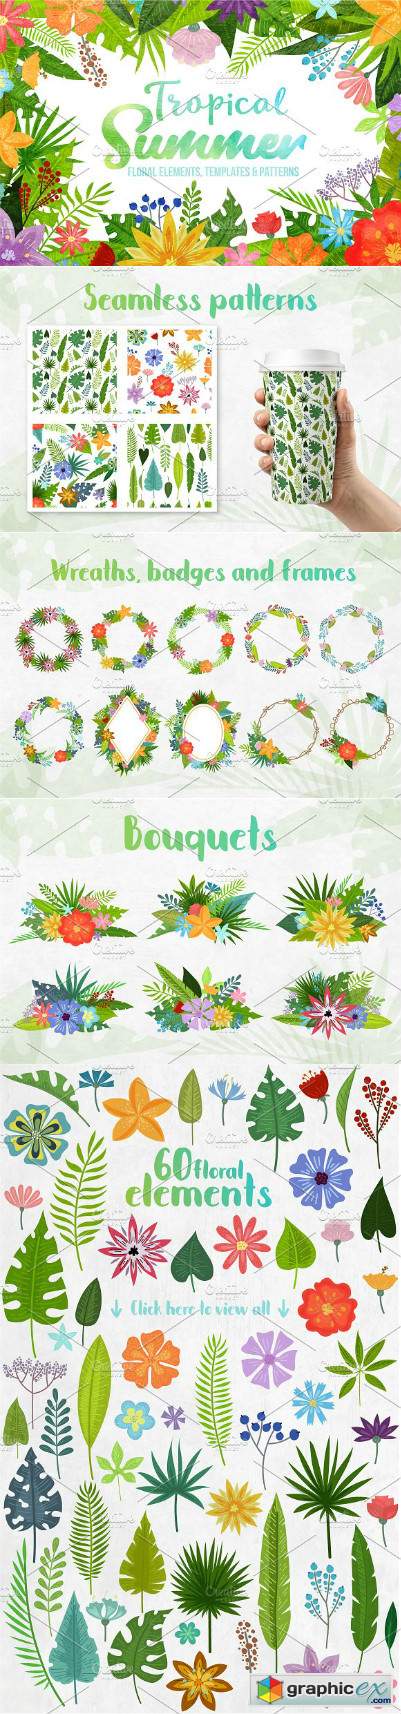 Tropical Summer - clipart collection